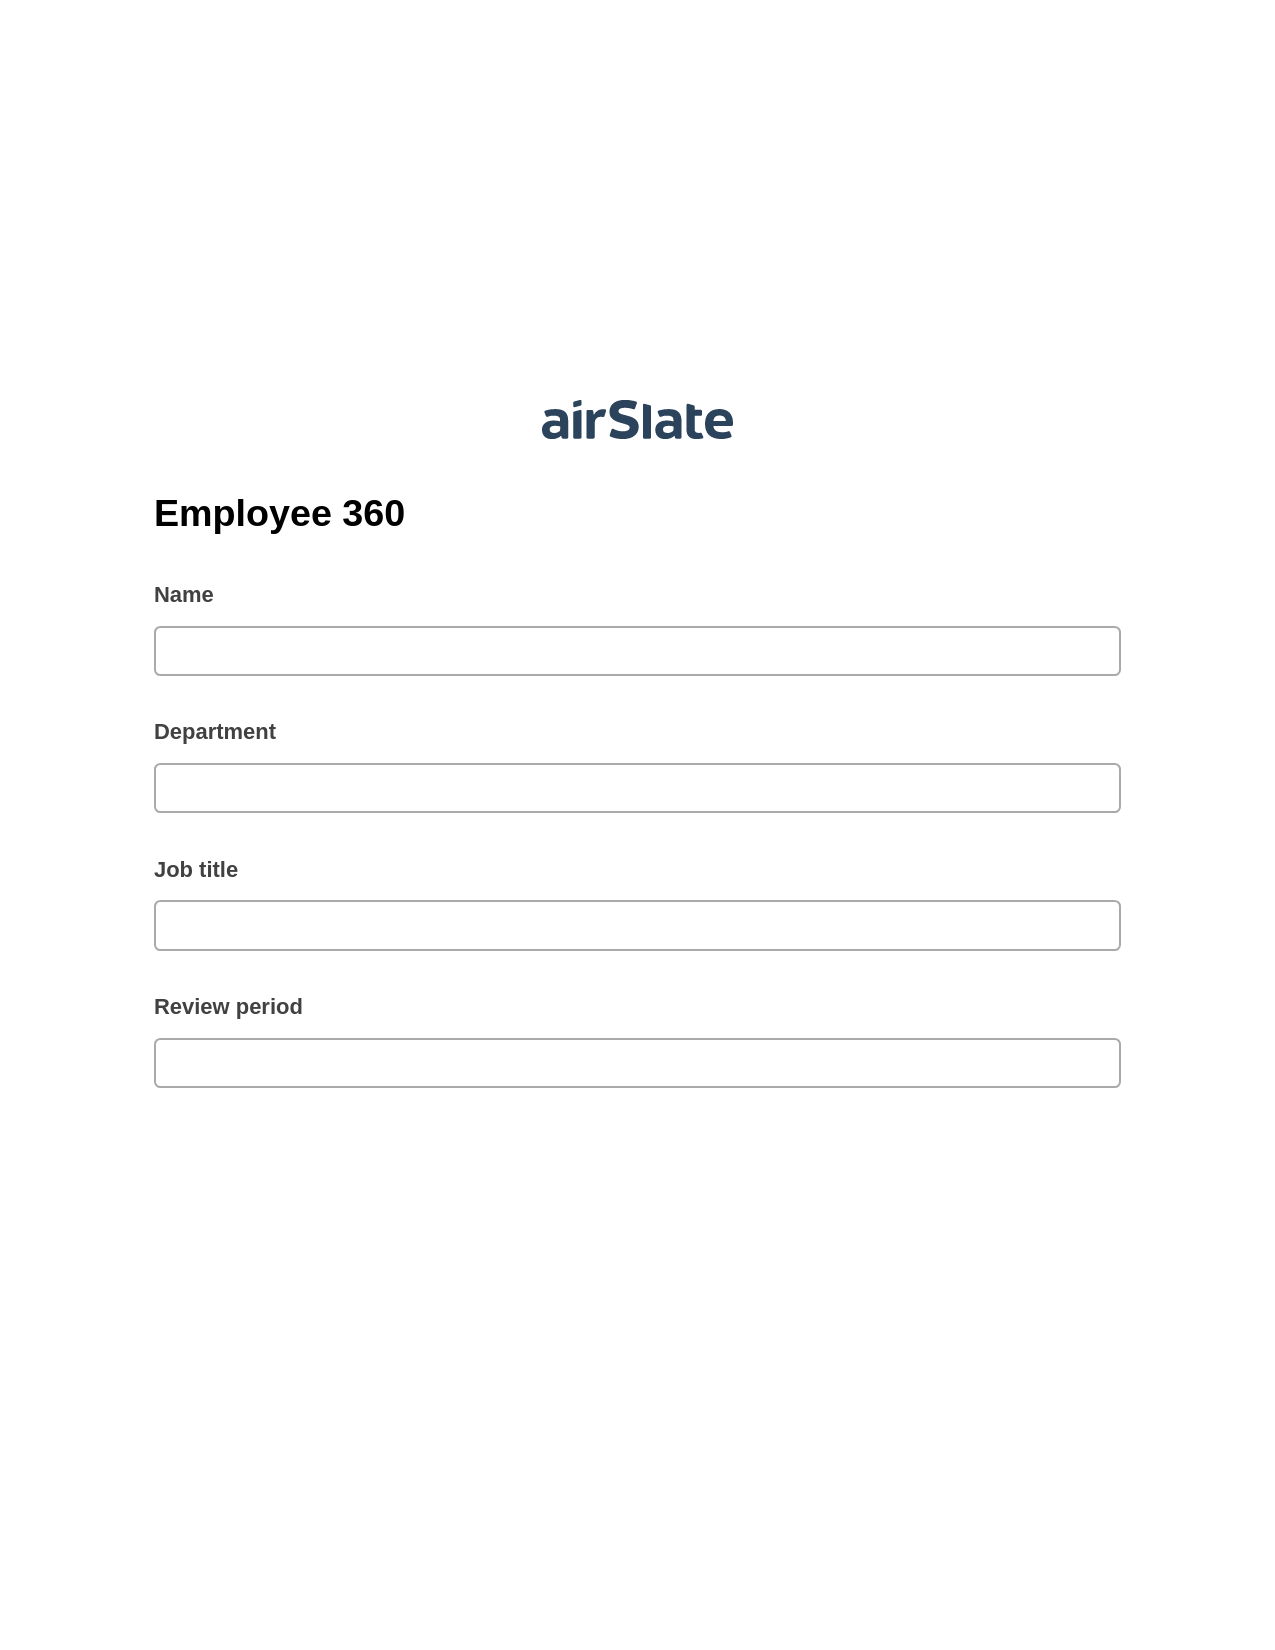 Employee 360 Pre-fill from another Slate Bot, Update MS Dynamics 365 Record Bot, Export to MySQL Bot